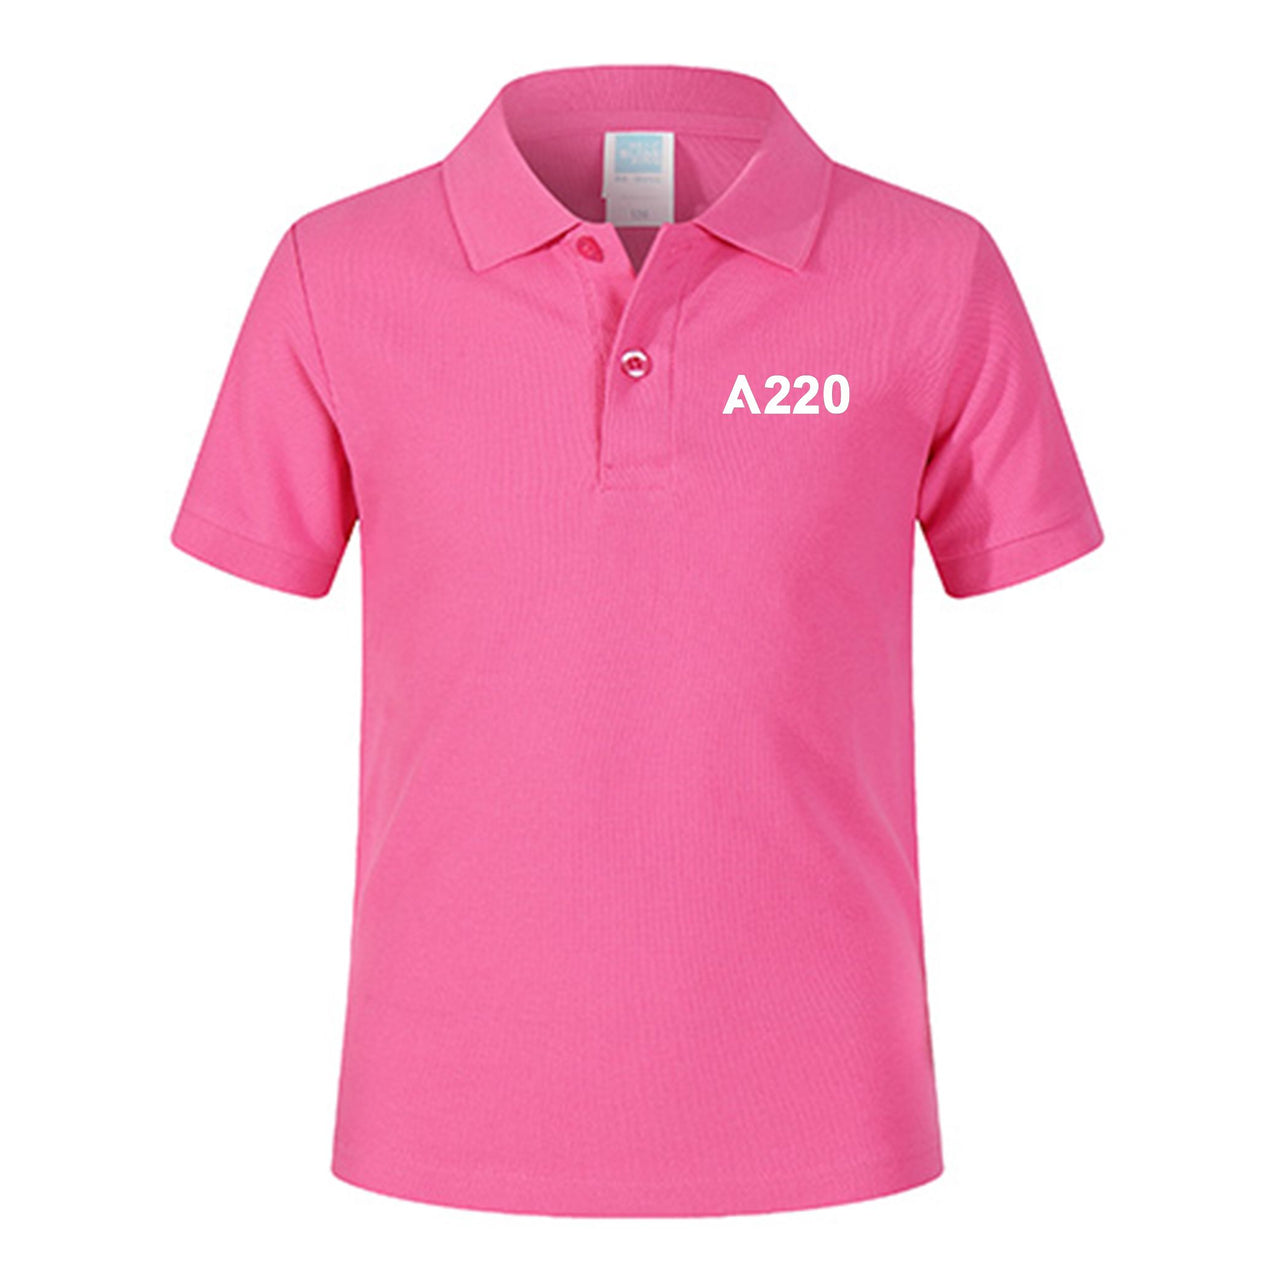 A220 Flat Text Designed Children Polo T-Shirts